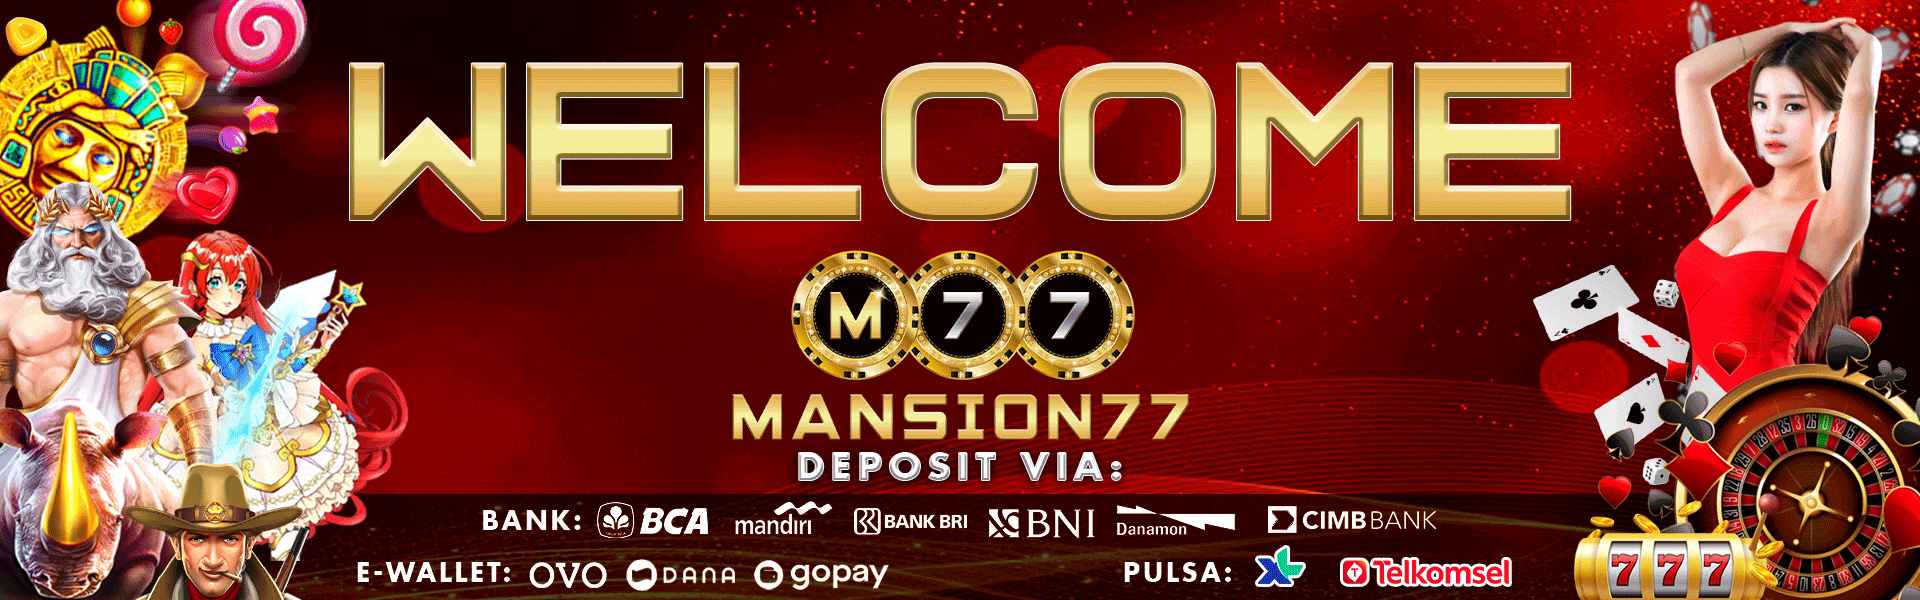 welcome banner mansion77